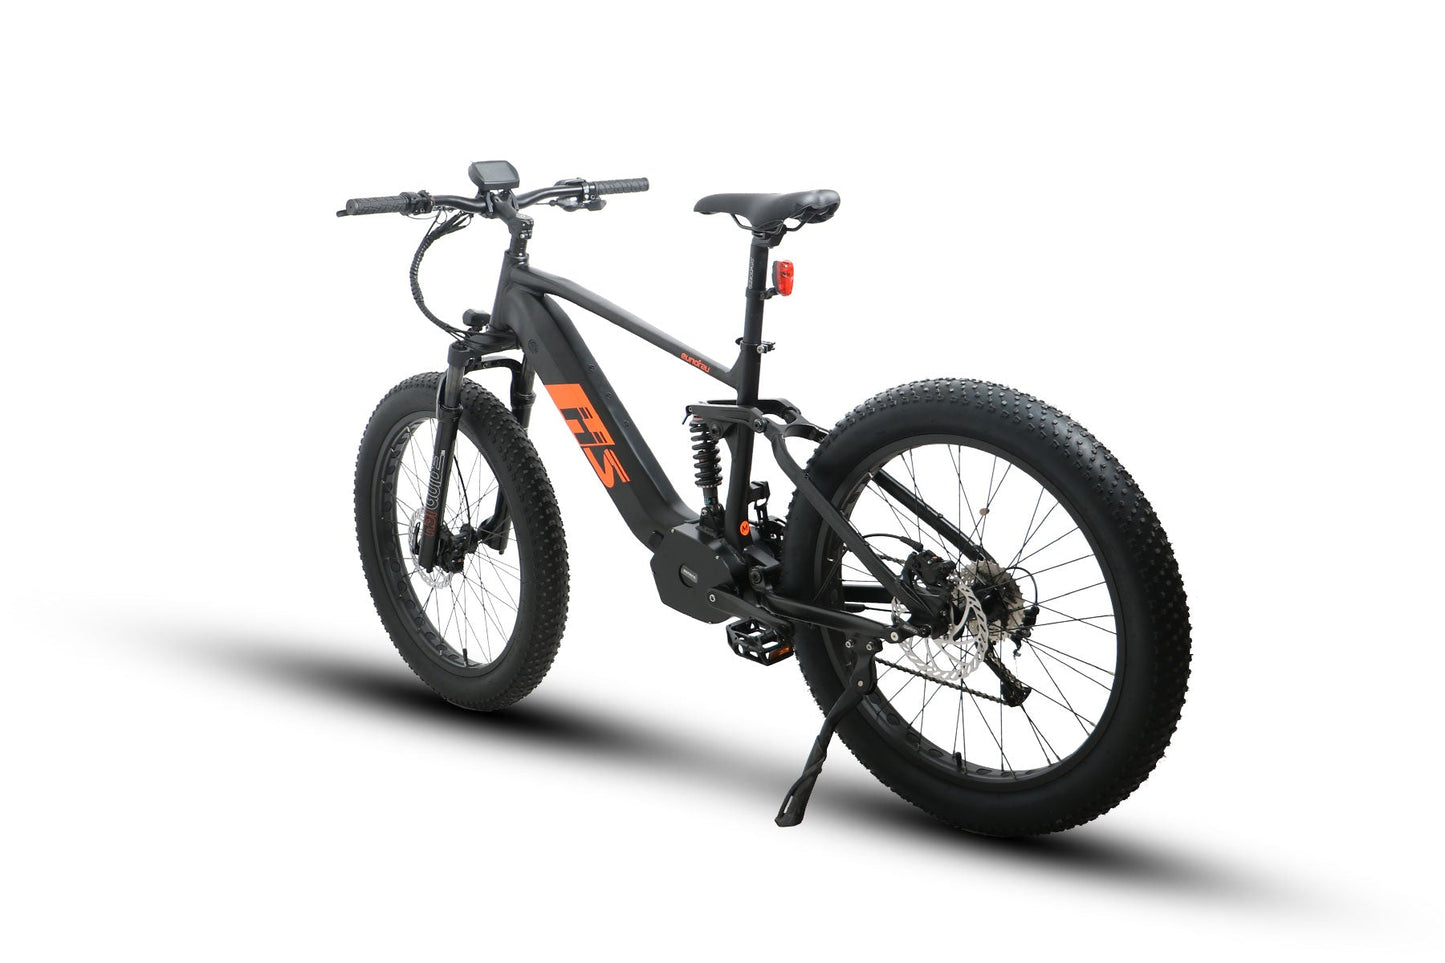 EUNORAU FAT-HS 26" Fat Tire 1000W E-Bike, with a powerful BAFANG M615 mid motor and cadence sensor for ultimate trail performance. The aluminum alloy frame comes with dual suspension, RST GUIDE 75mm travel fork, and KS-388L shock for a smooth ride. Enjoy an 80-mile range and quick 4-6 hour charging time with the 48V/17Ah SAMSUNG cell lithium-ion battery.